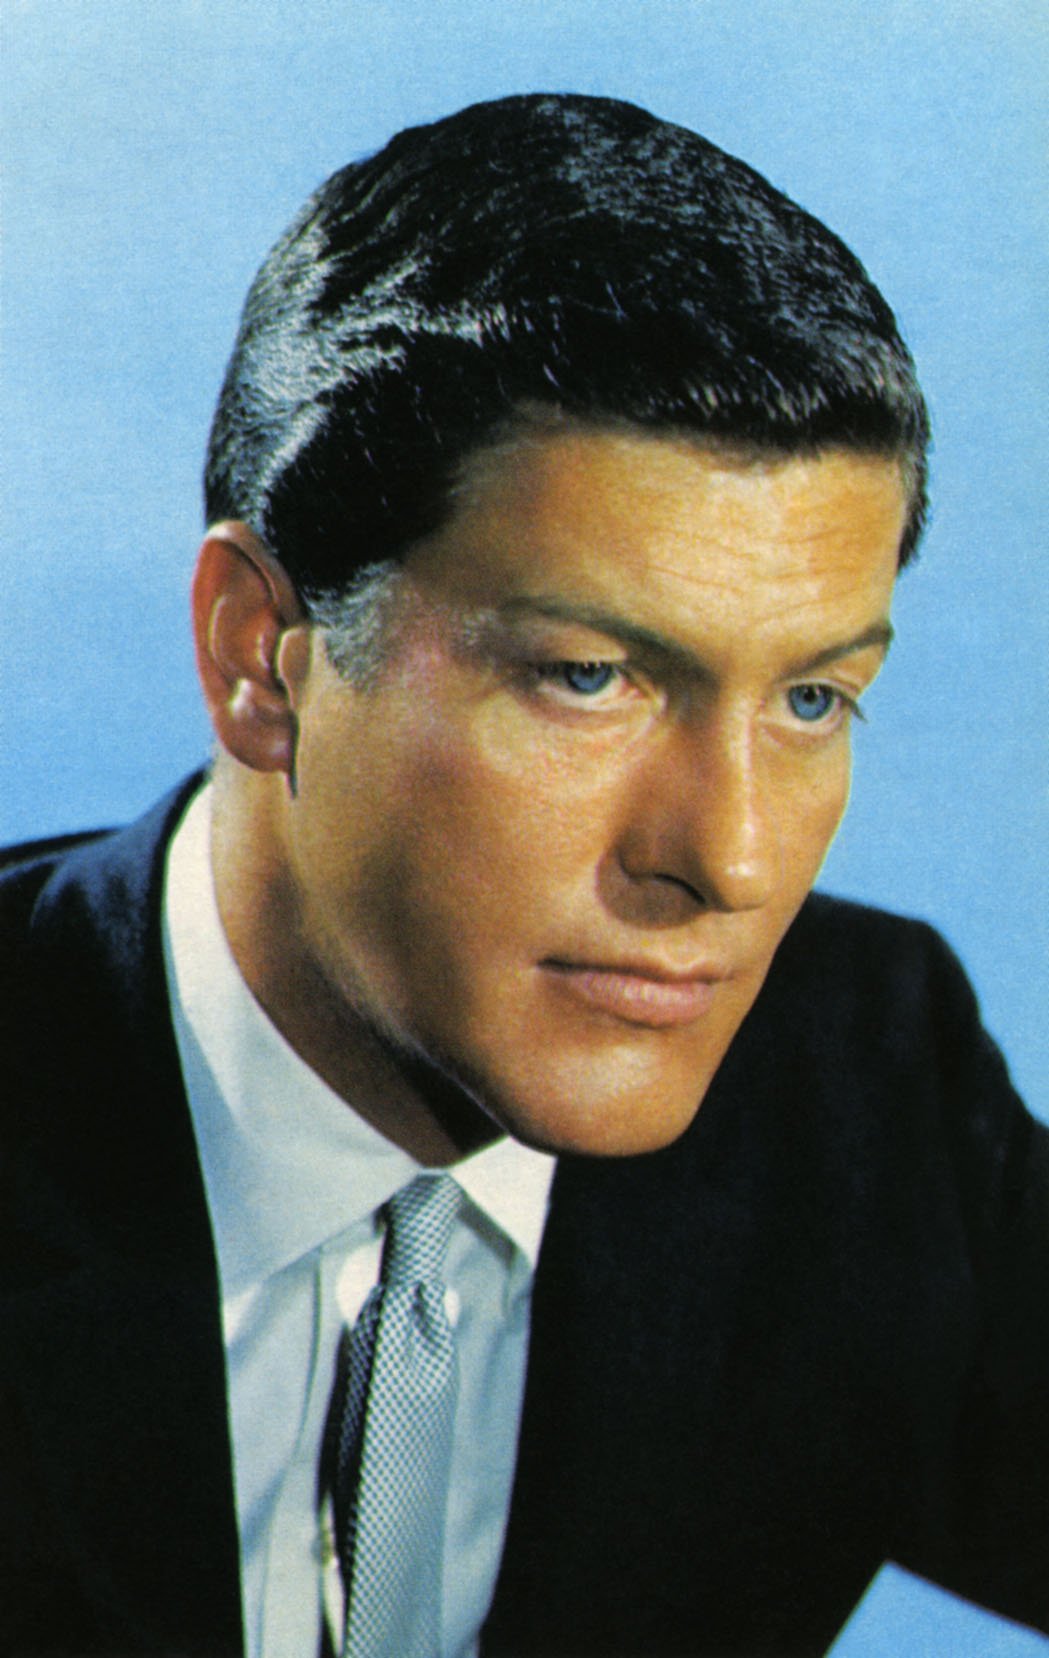 Dick Van Dyke is an actor, comedian, dancer, and singer | Photo: Getty Images